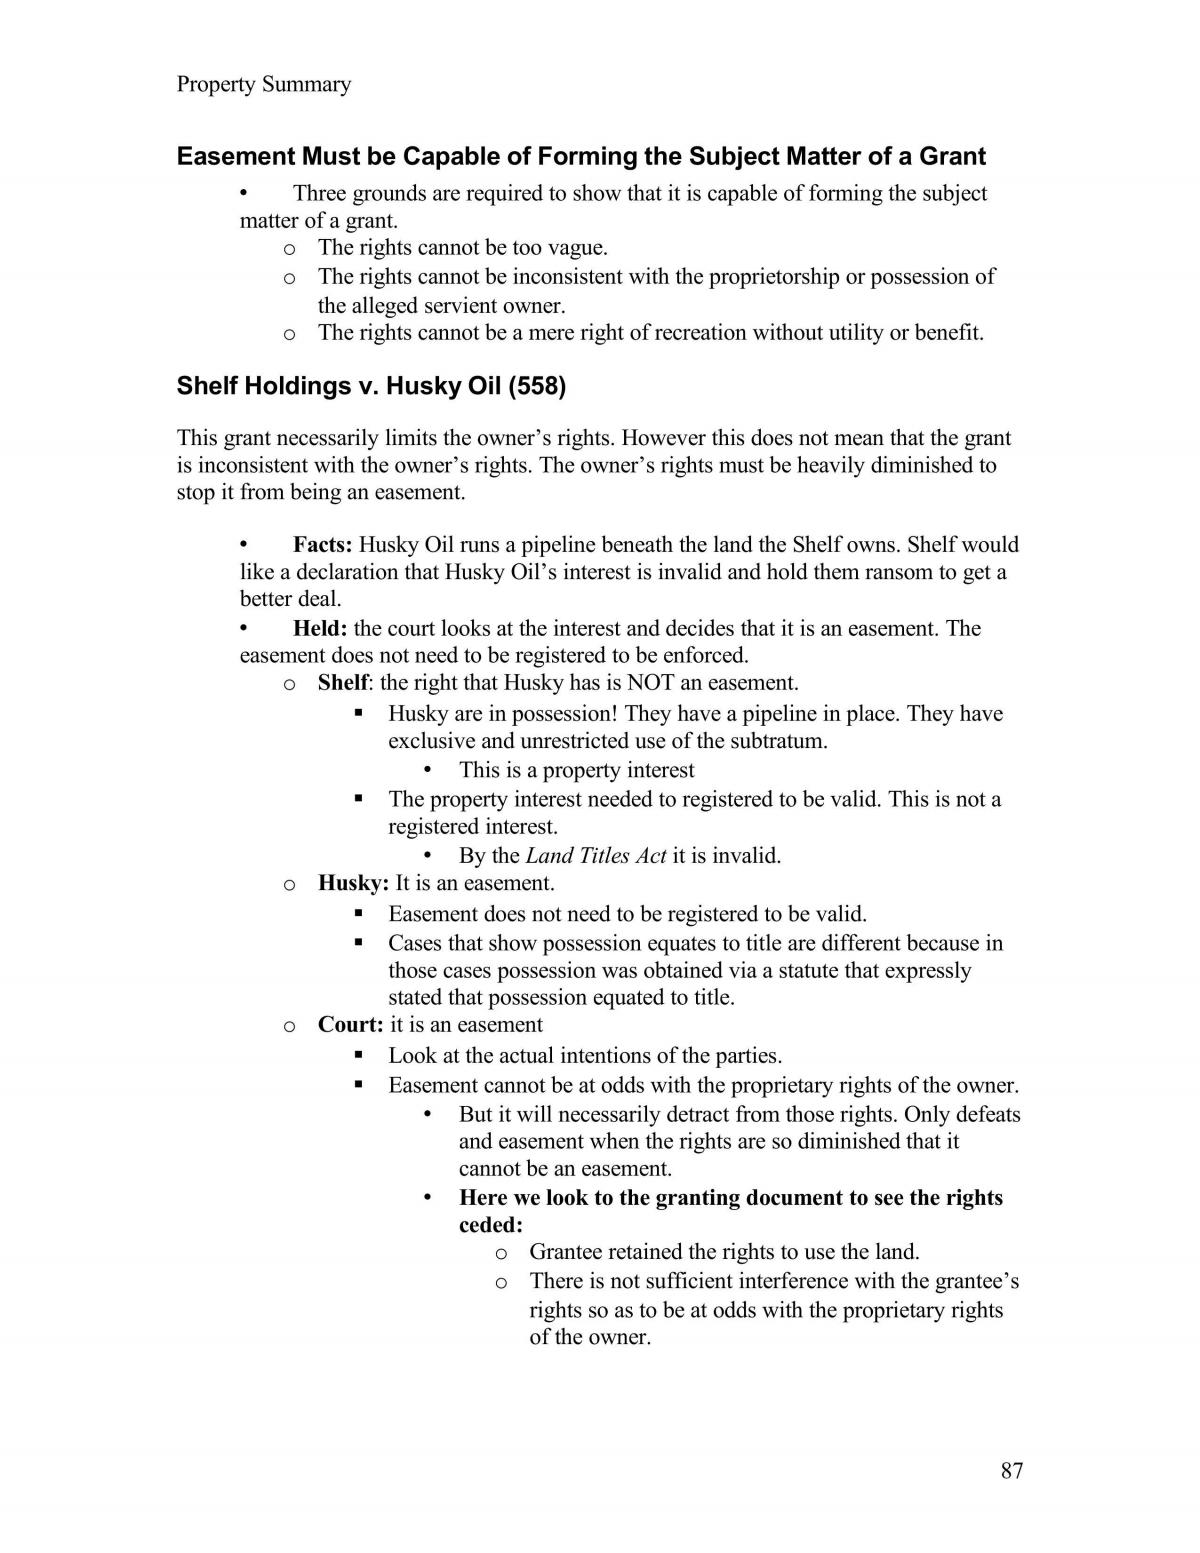 easement act law notes